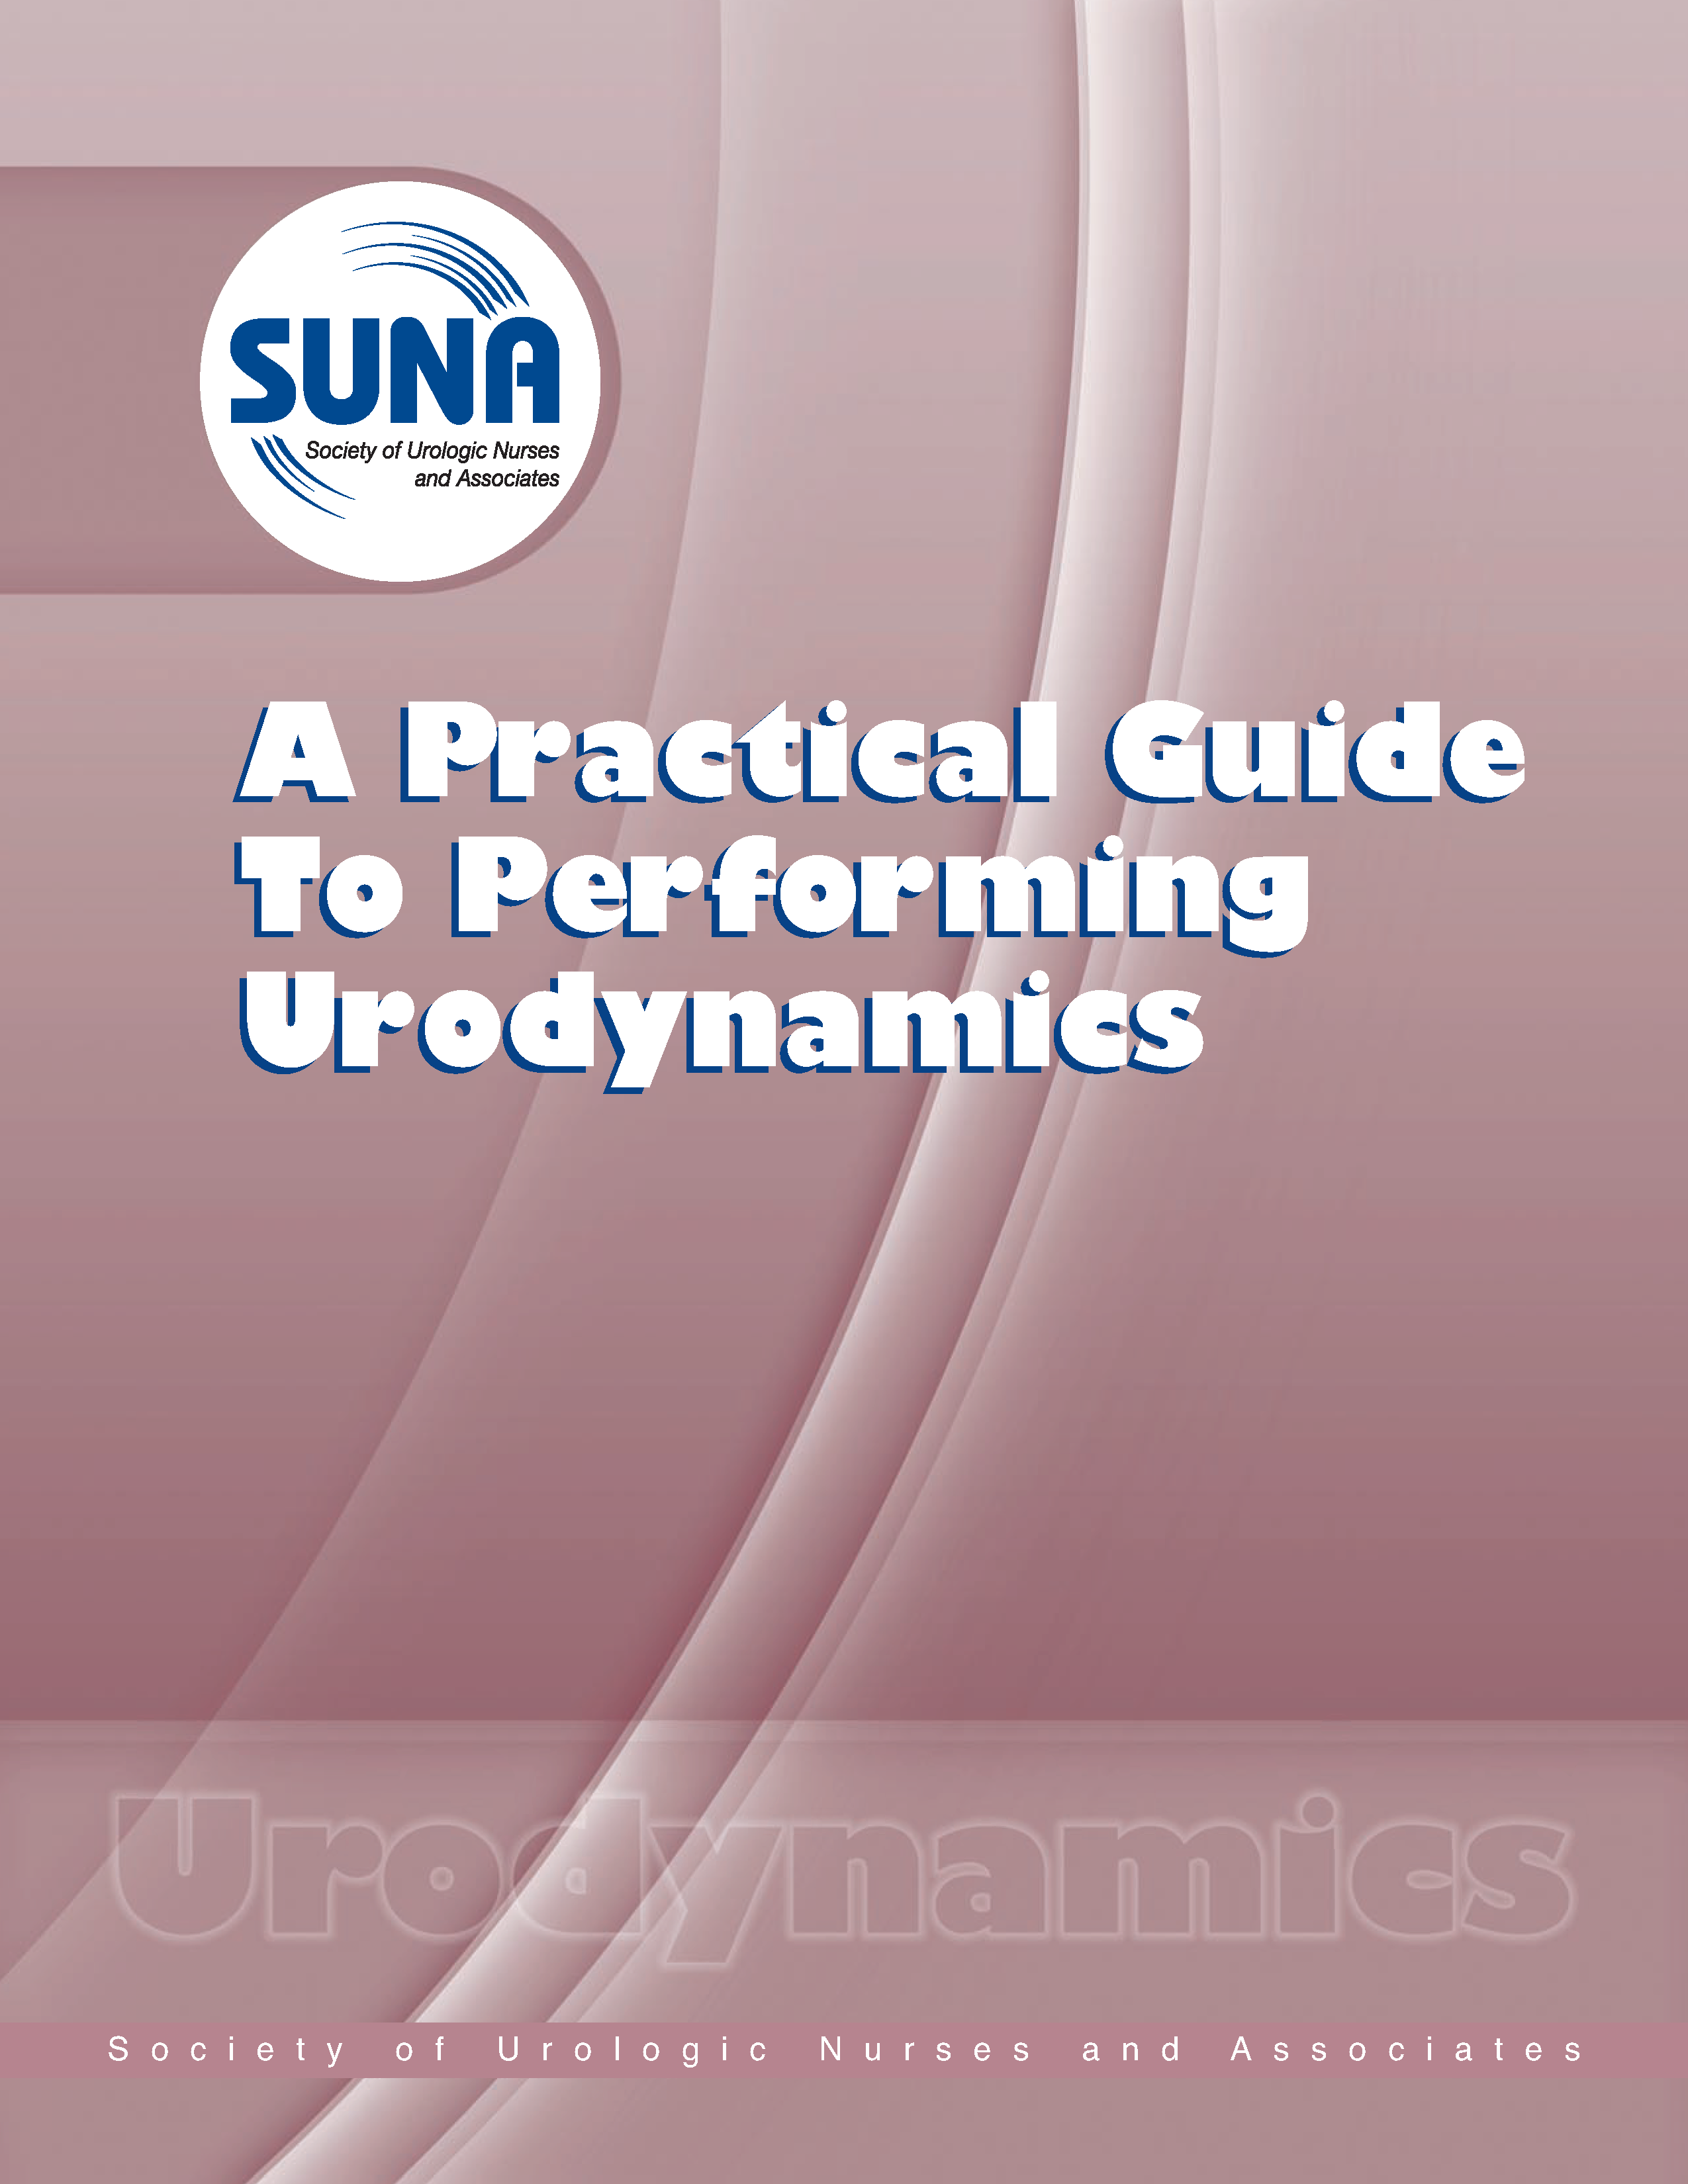 A Practical Guide to Performing Urodynamics